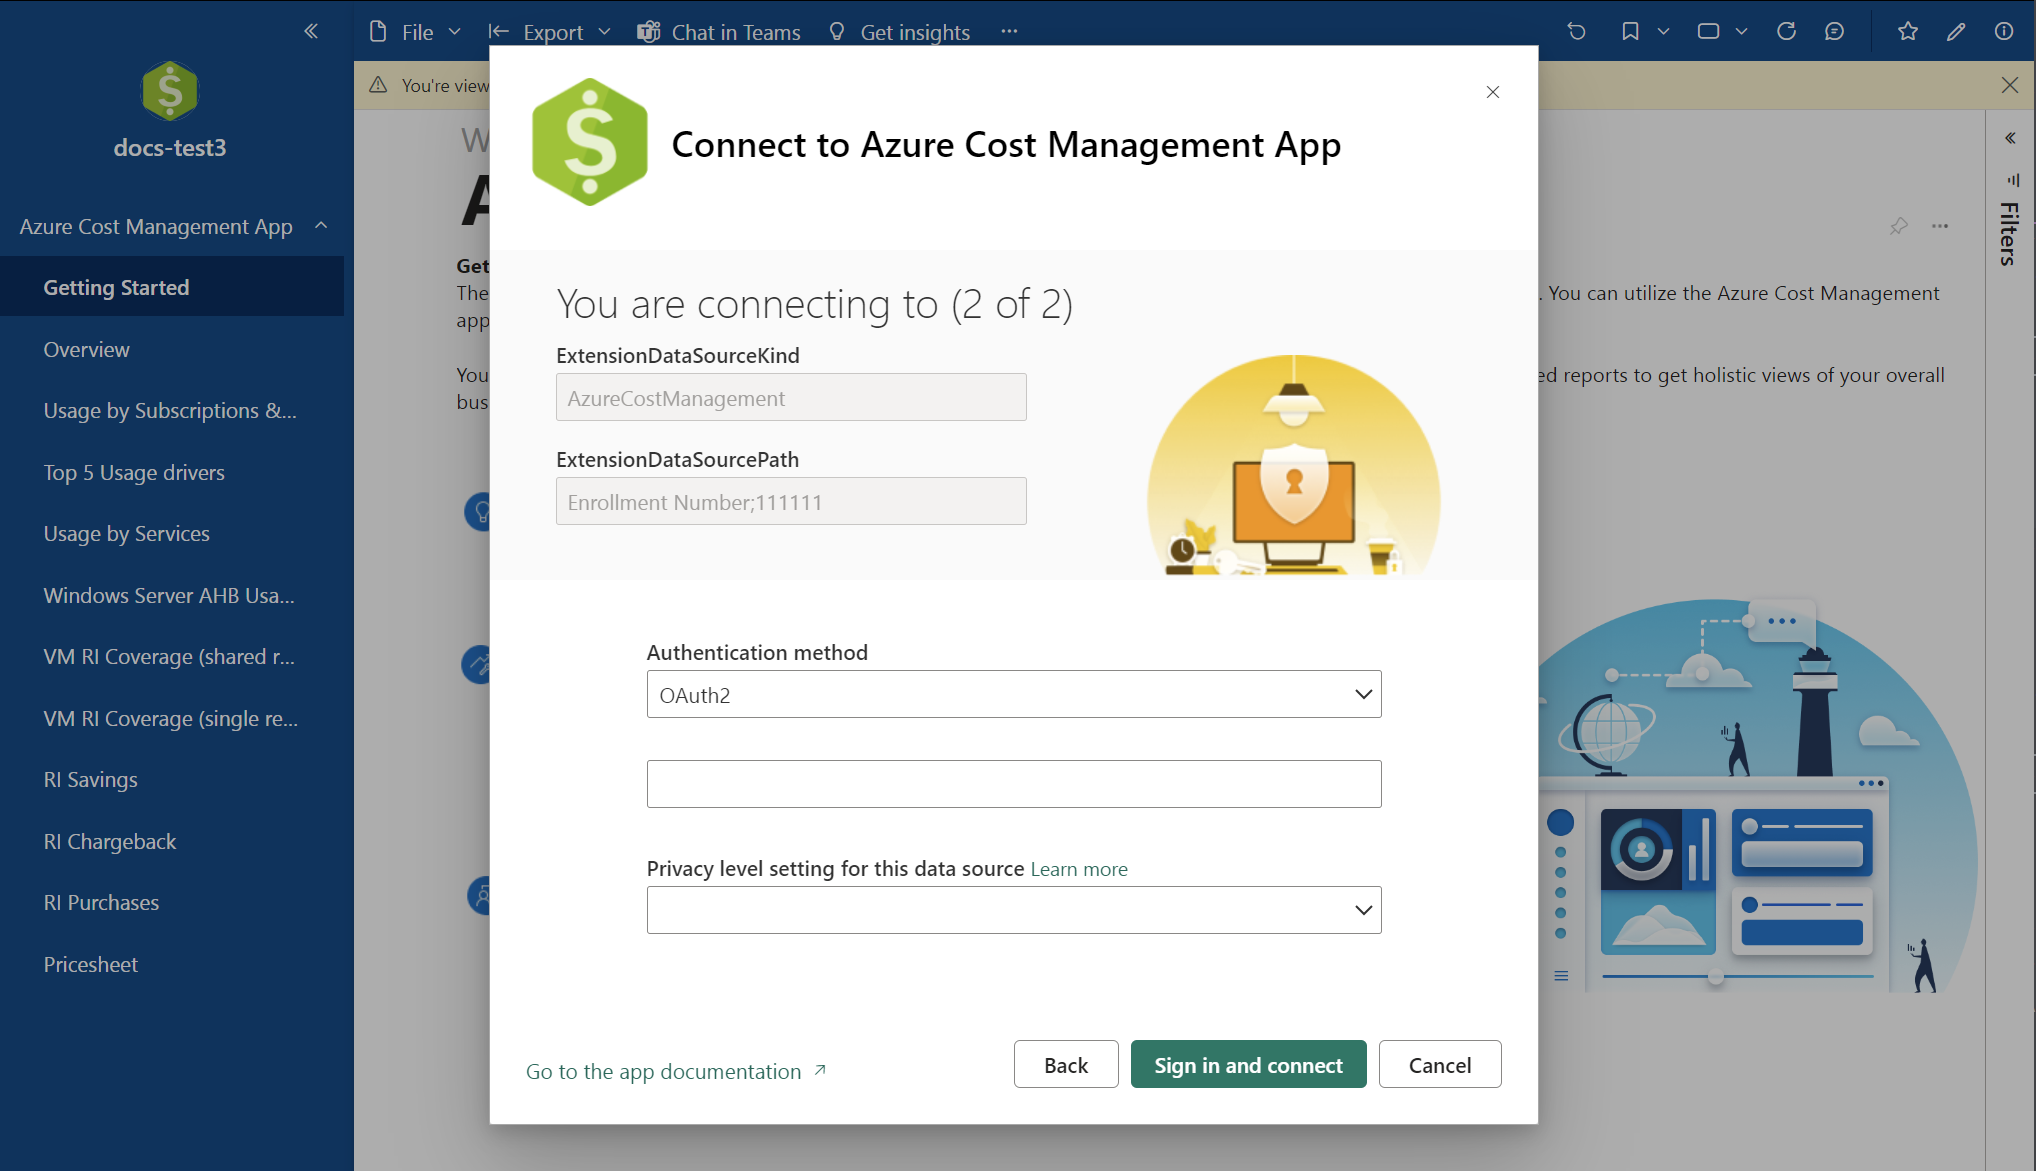 Screenshot showing the Connect to Cost Management App dialog box with default values.